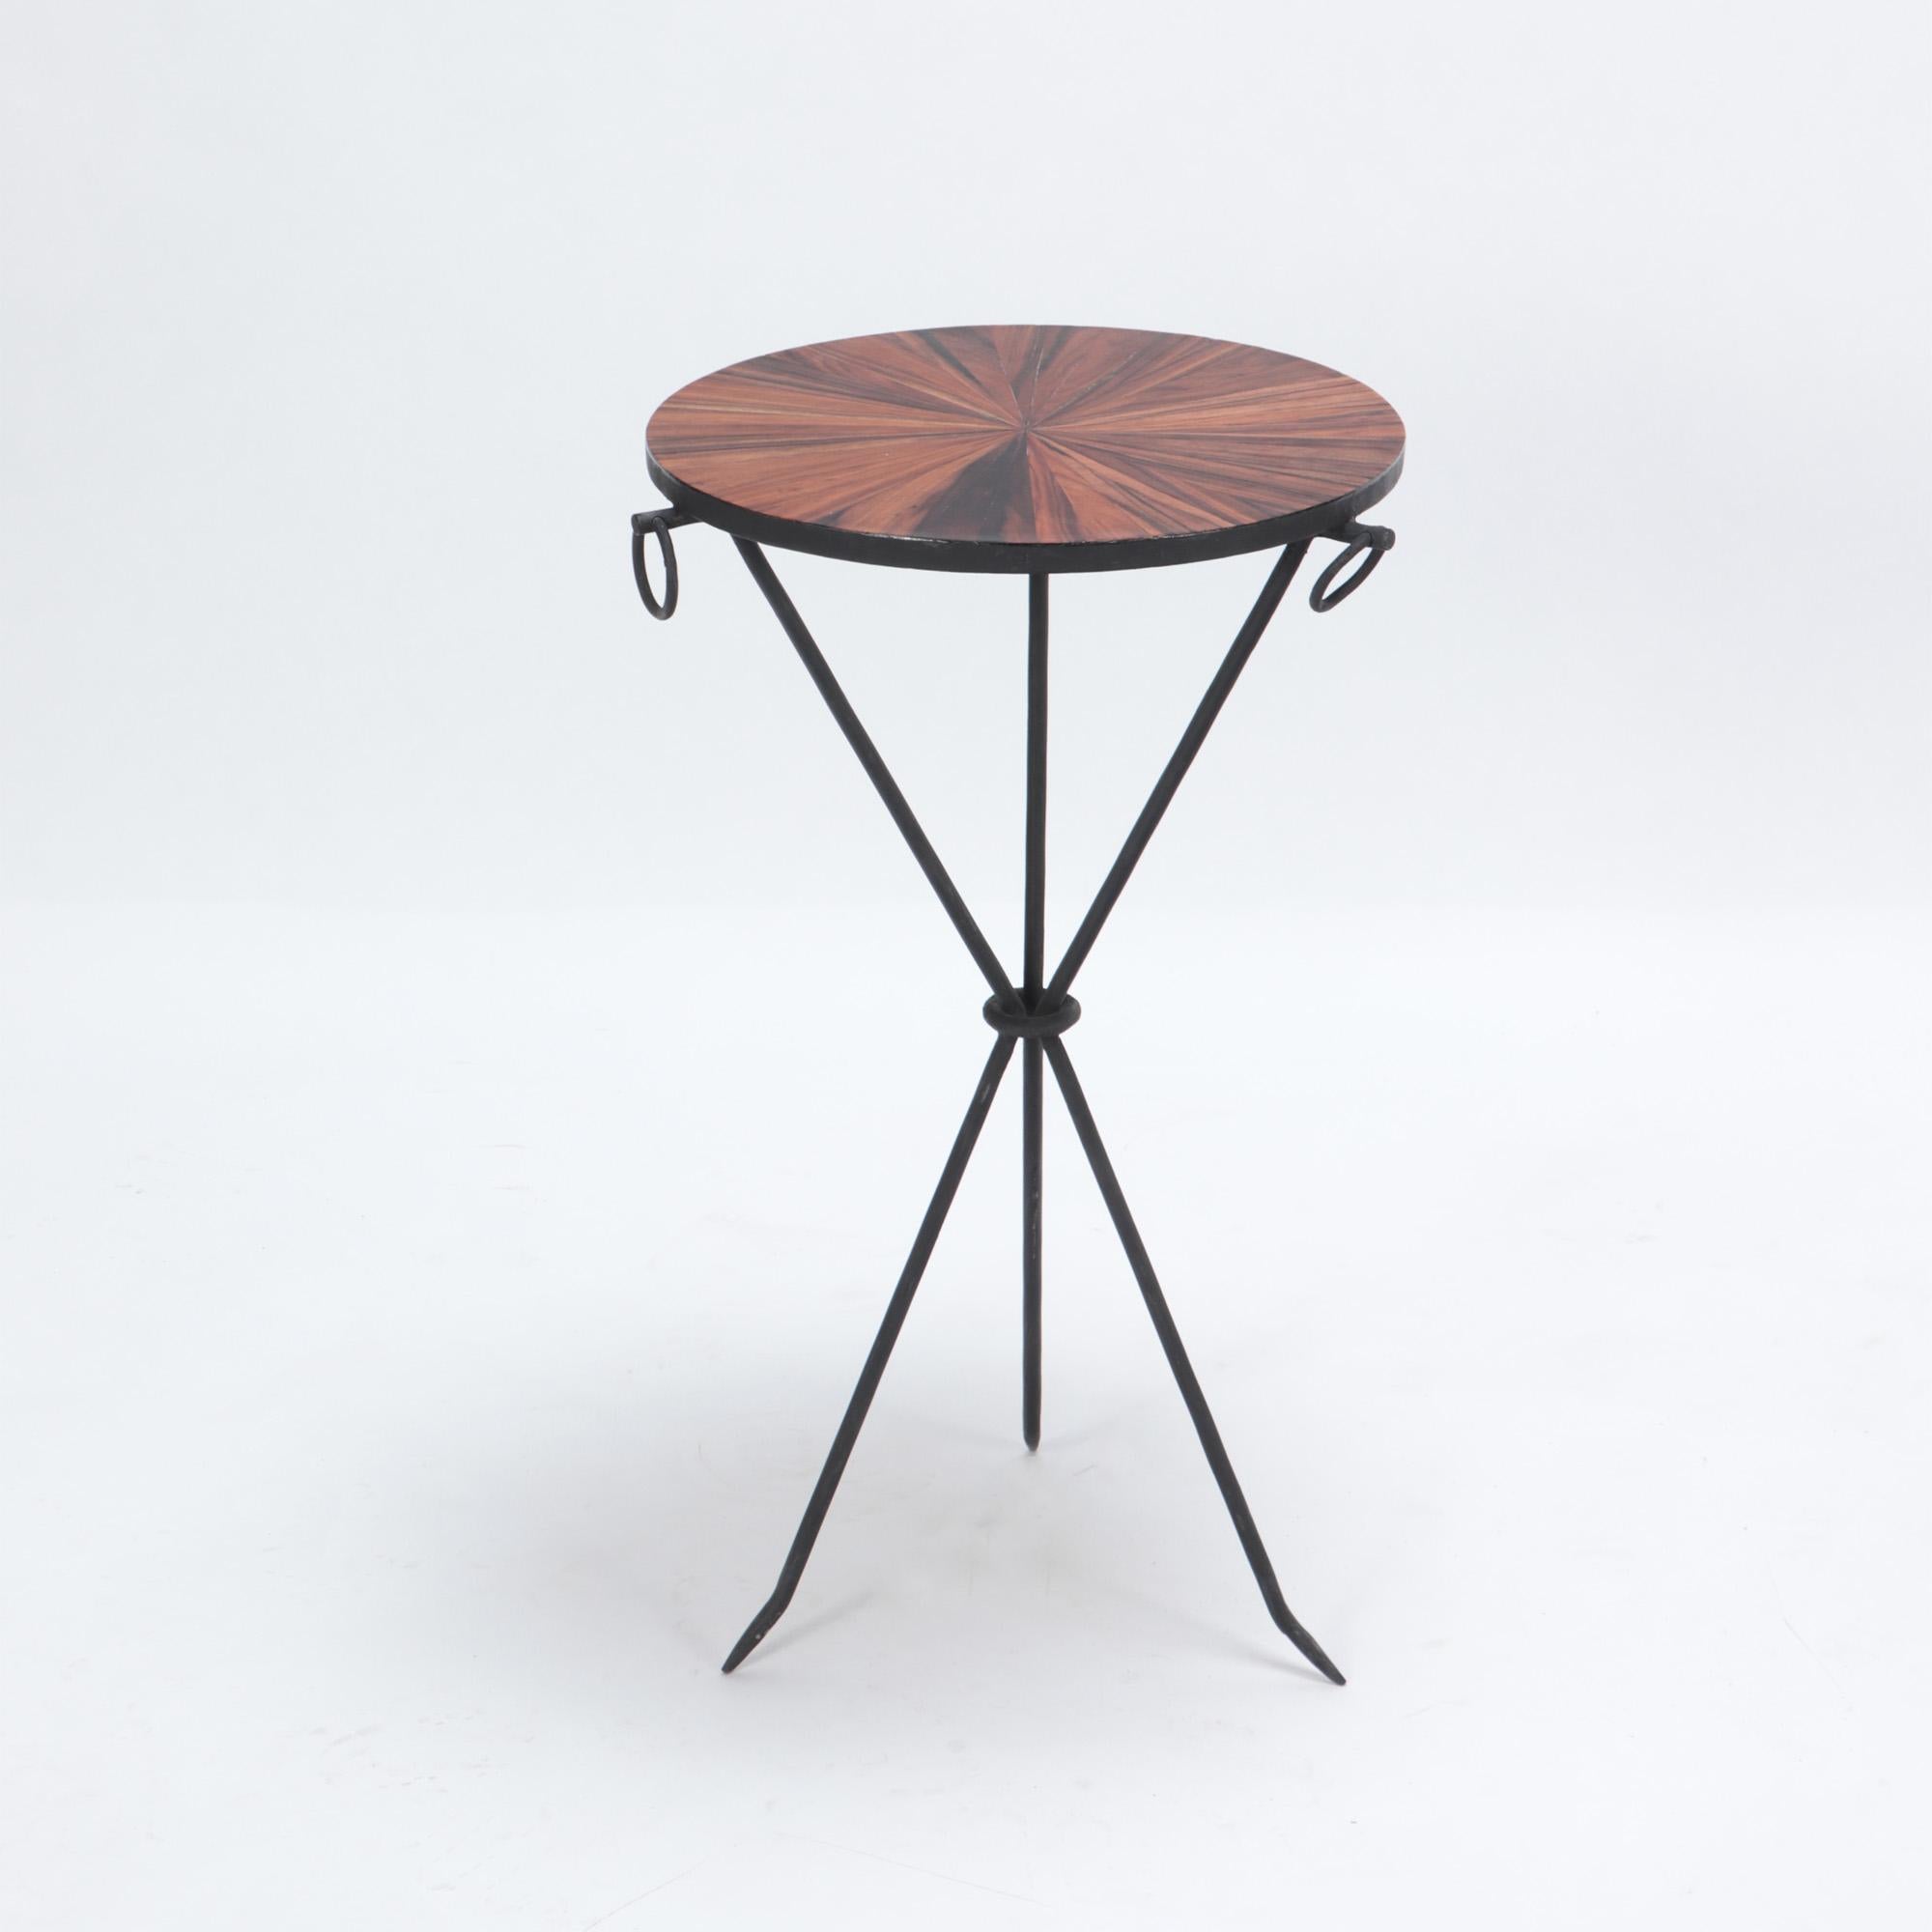 A pair of wrought iron drink tables with parquet tops and three iron rings. in the manner of Jean-Michel Frank. The tables rest on a sleek tripod form base.